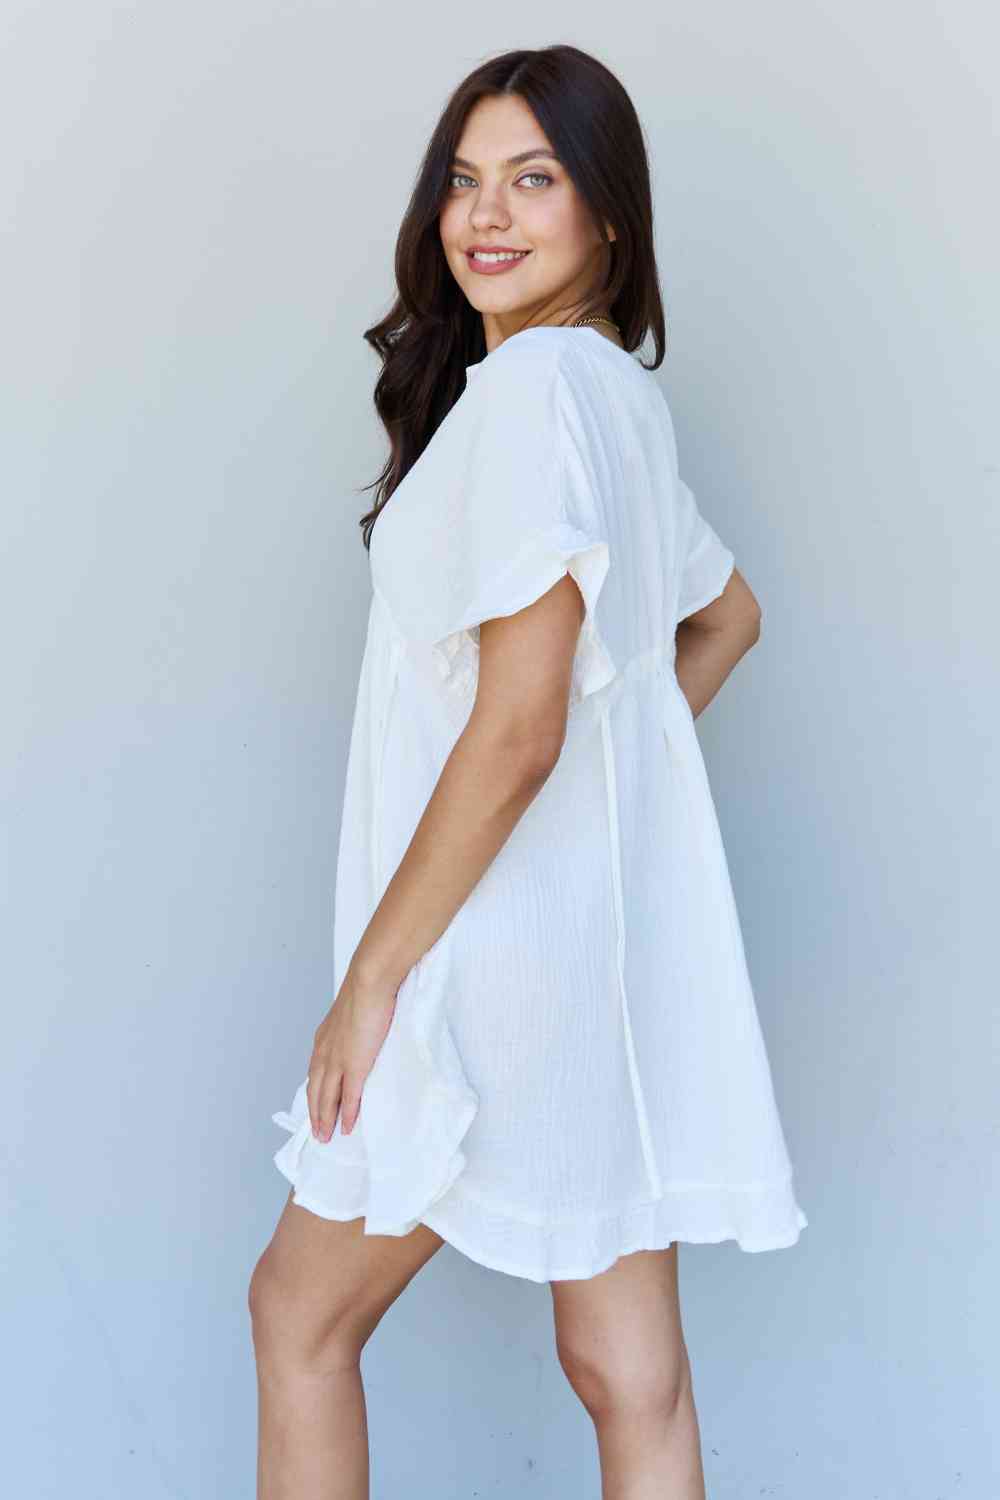 Ninexis Out Of Time Full Size Ruffle Hem Dress with Drawstring Waistband in White No 2